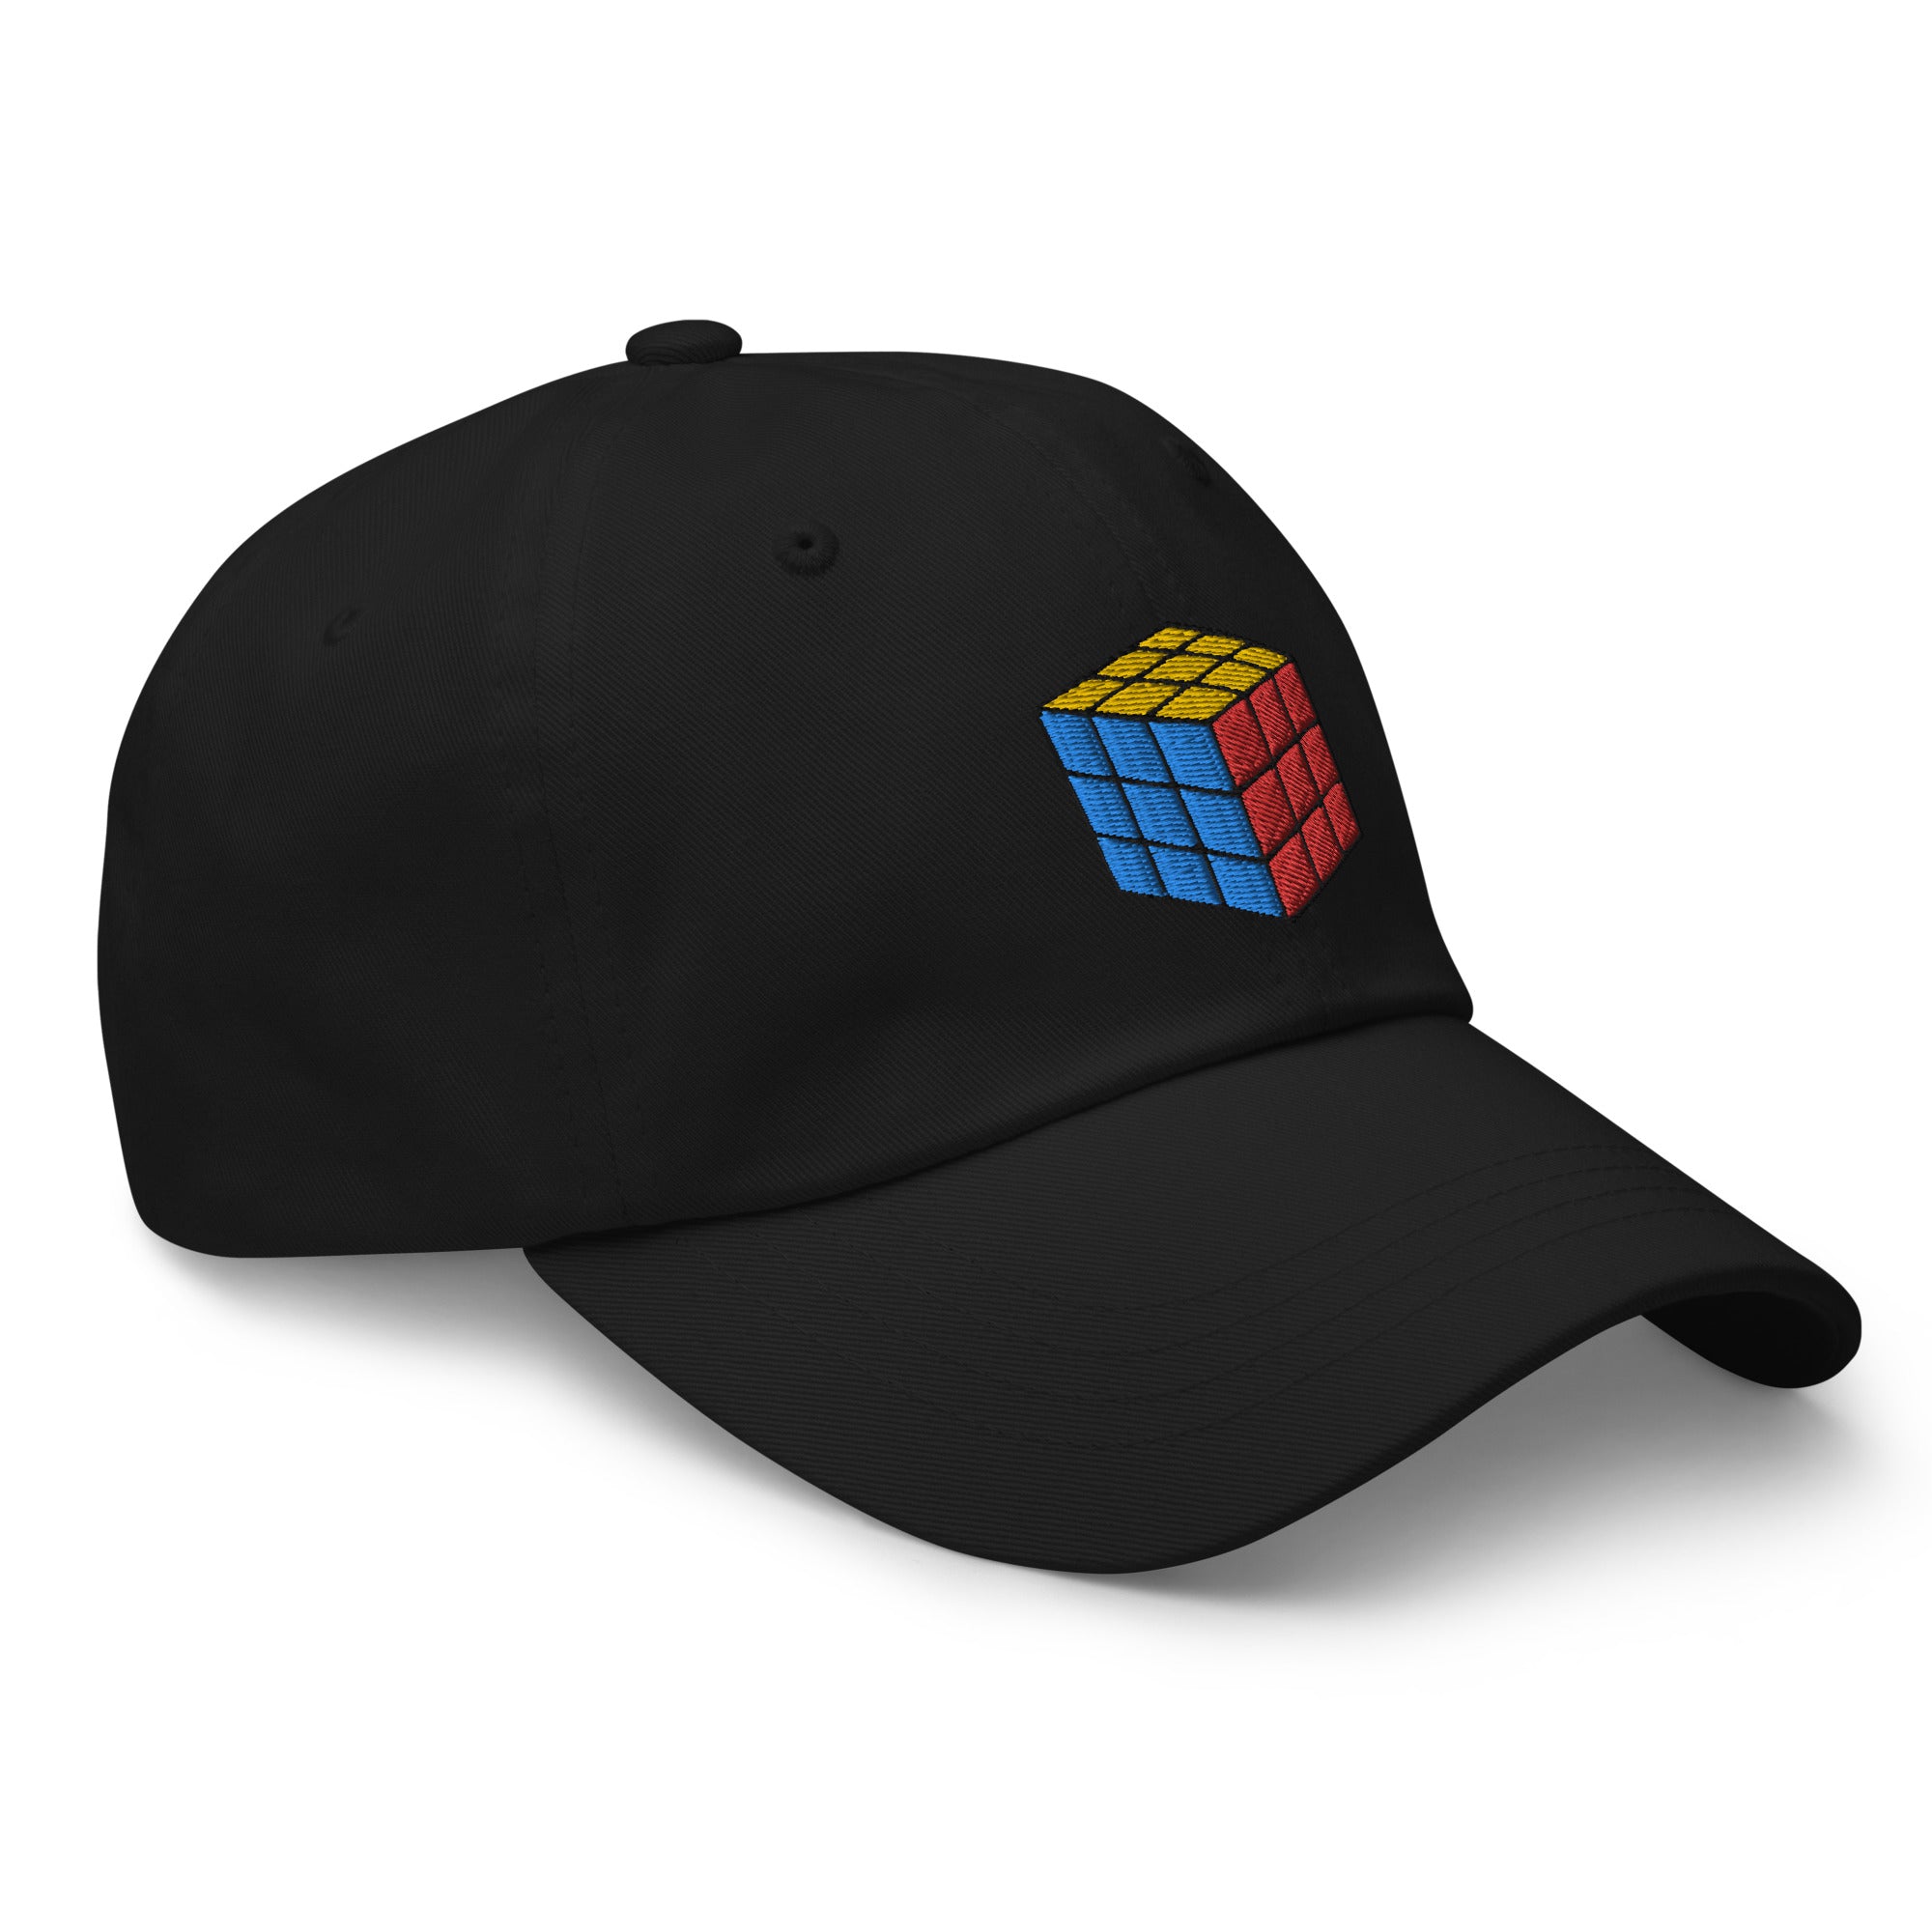 Gaming Speed Cube Puzzle Box Embroidered Baseball Cap Rubik's Cube Dad hat - Edge of Life Designs